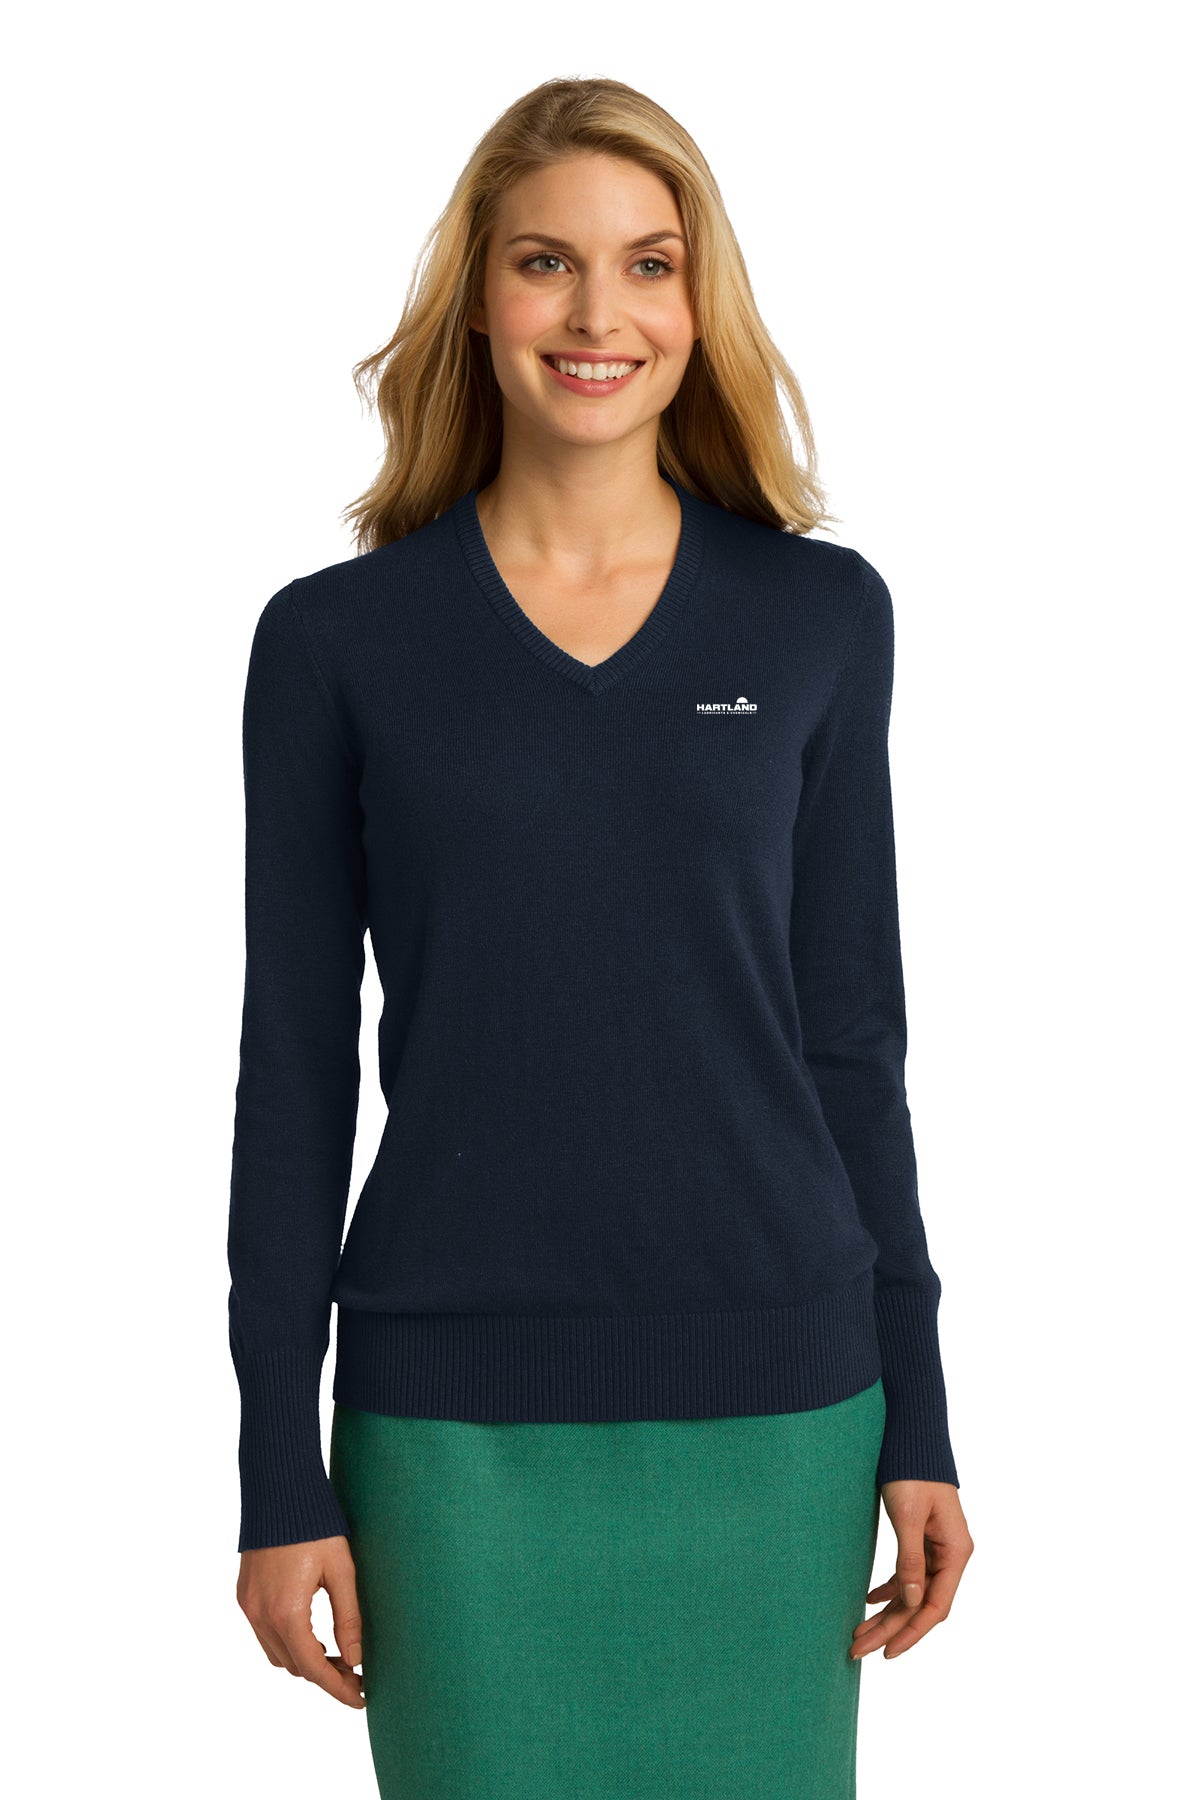 Hartland Lubricants and Chemicals Ladies V-Neck Sweater